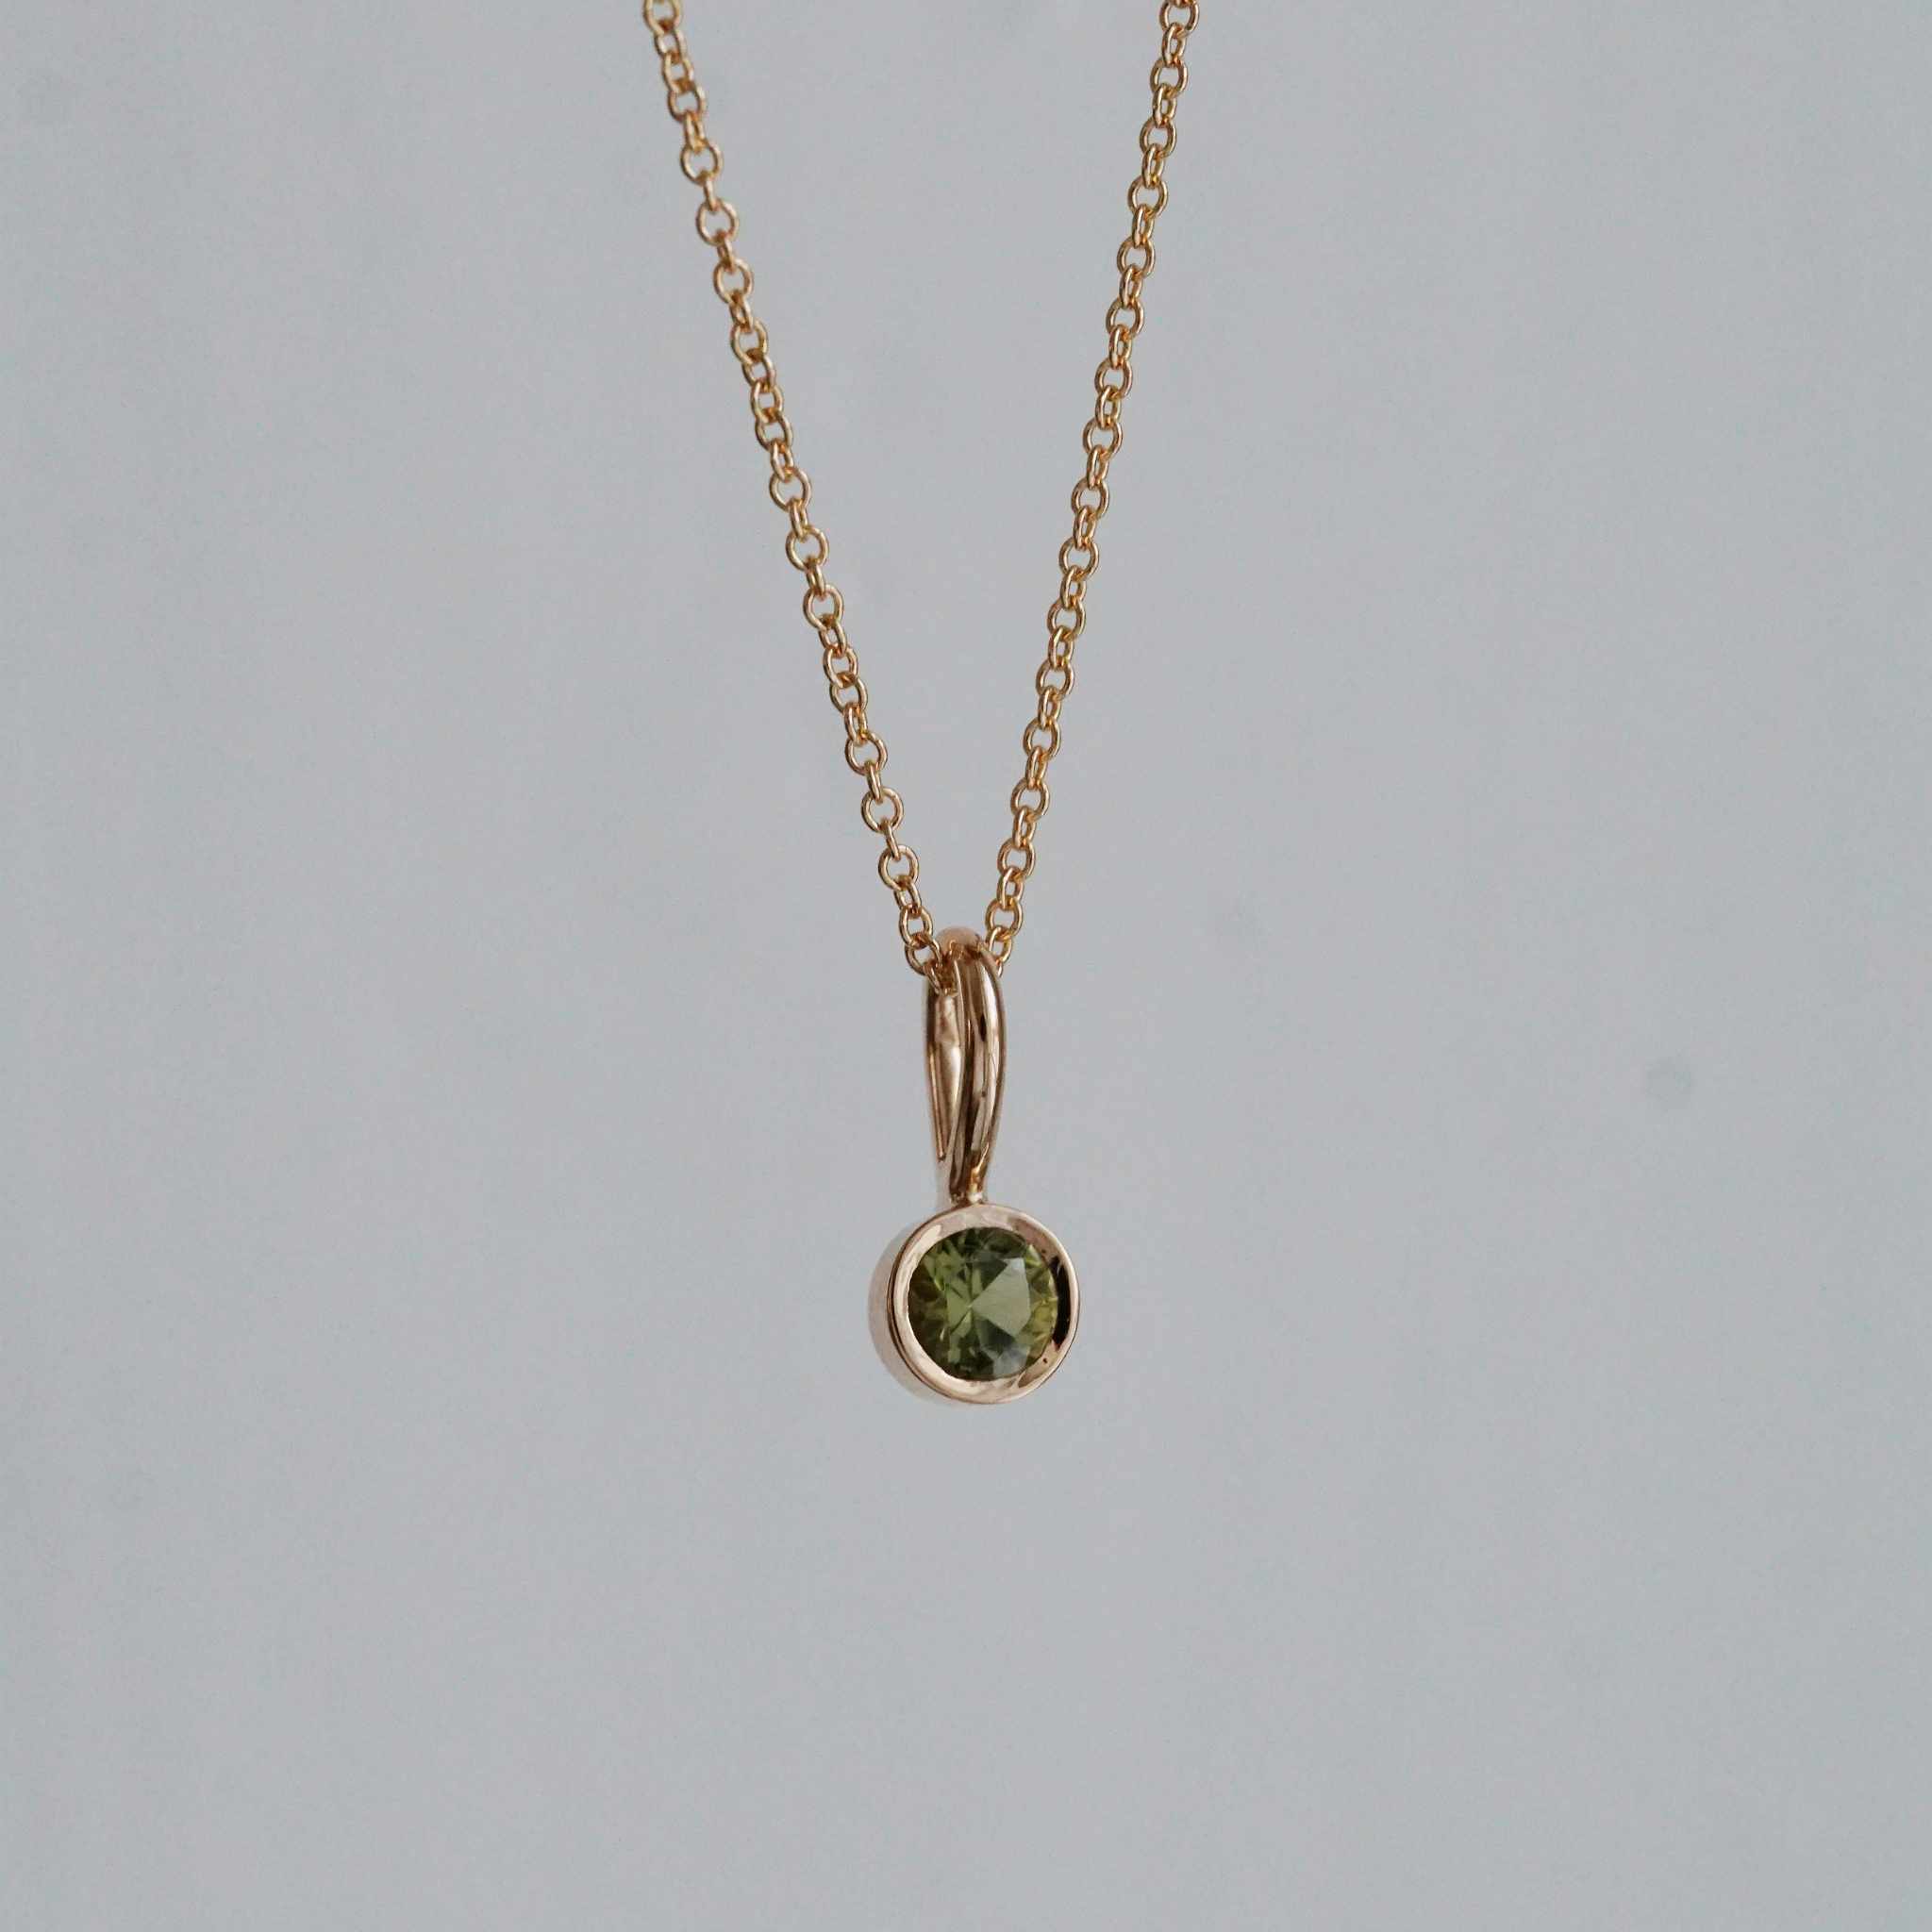 "Malmberget" pendant in gold with an apatite from Gällivare